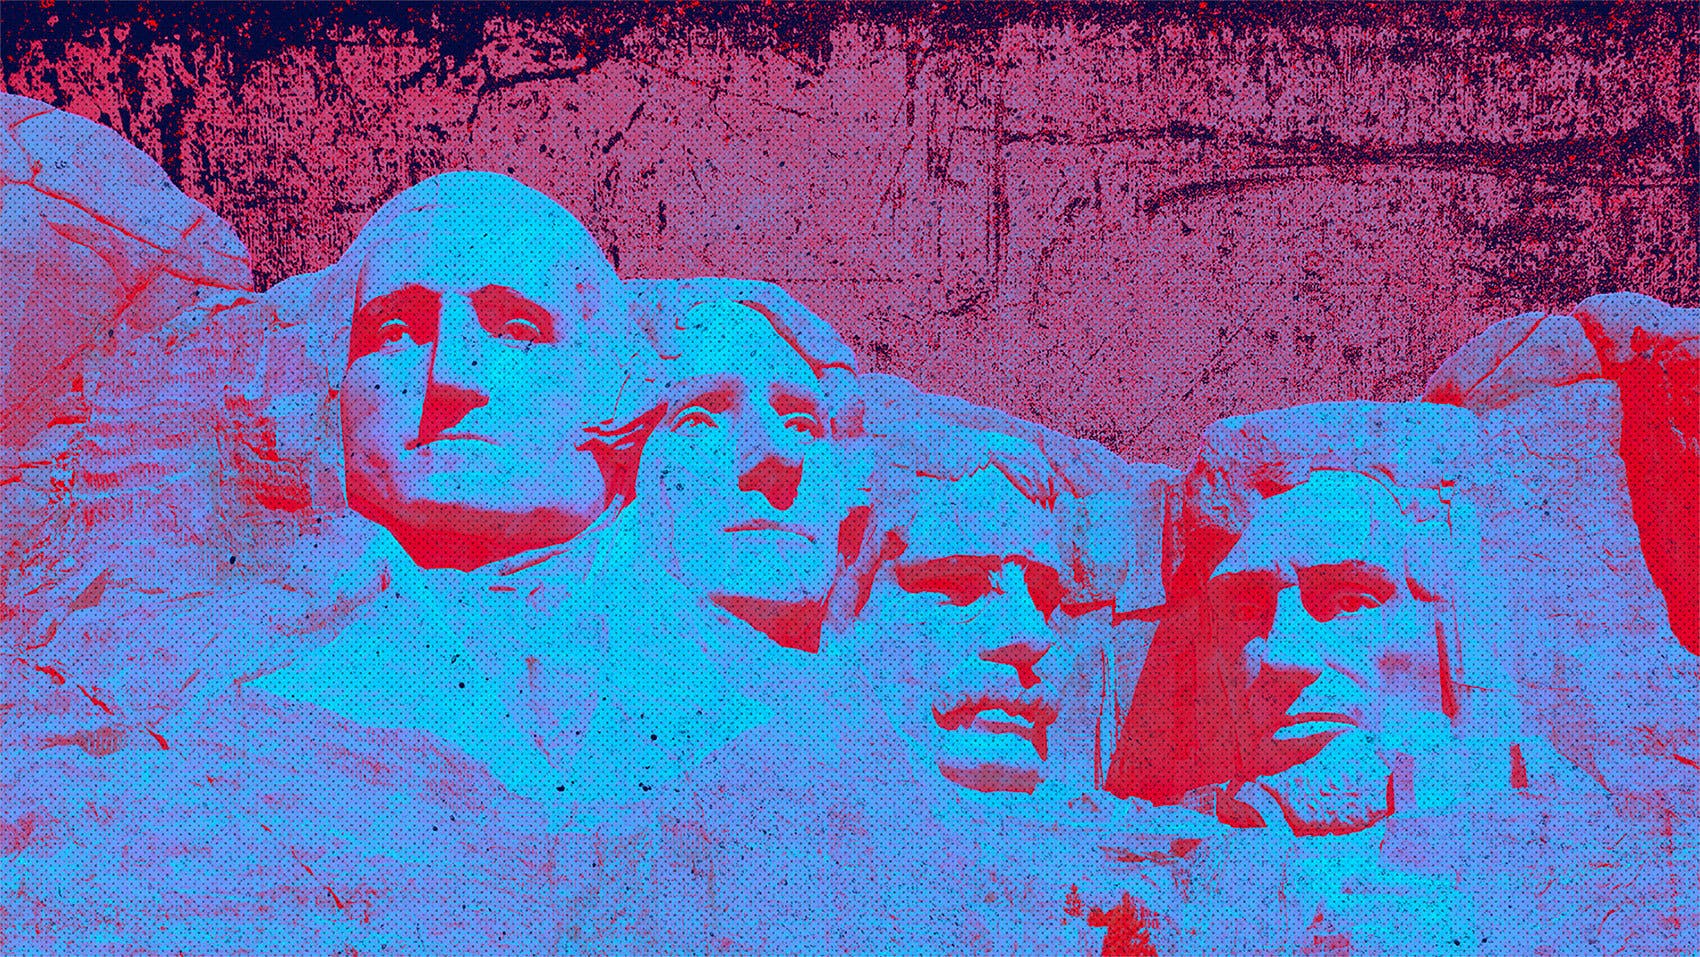 17 songs about U.S. presidents